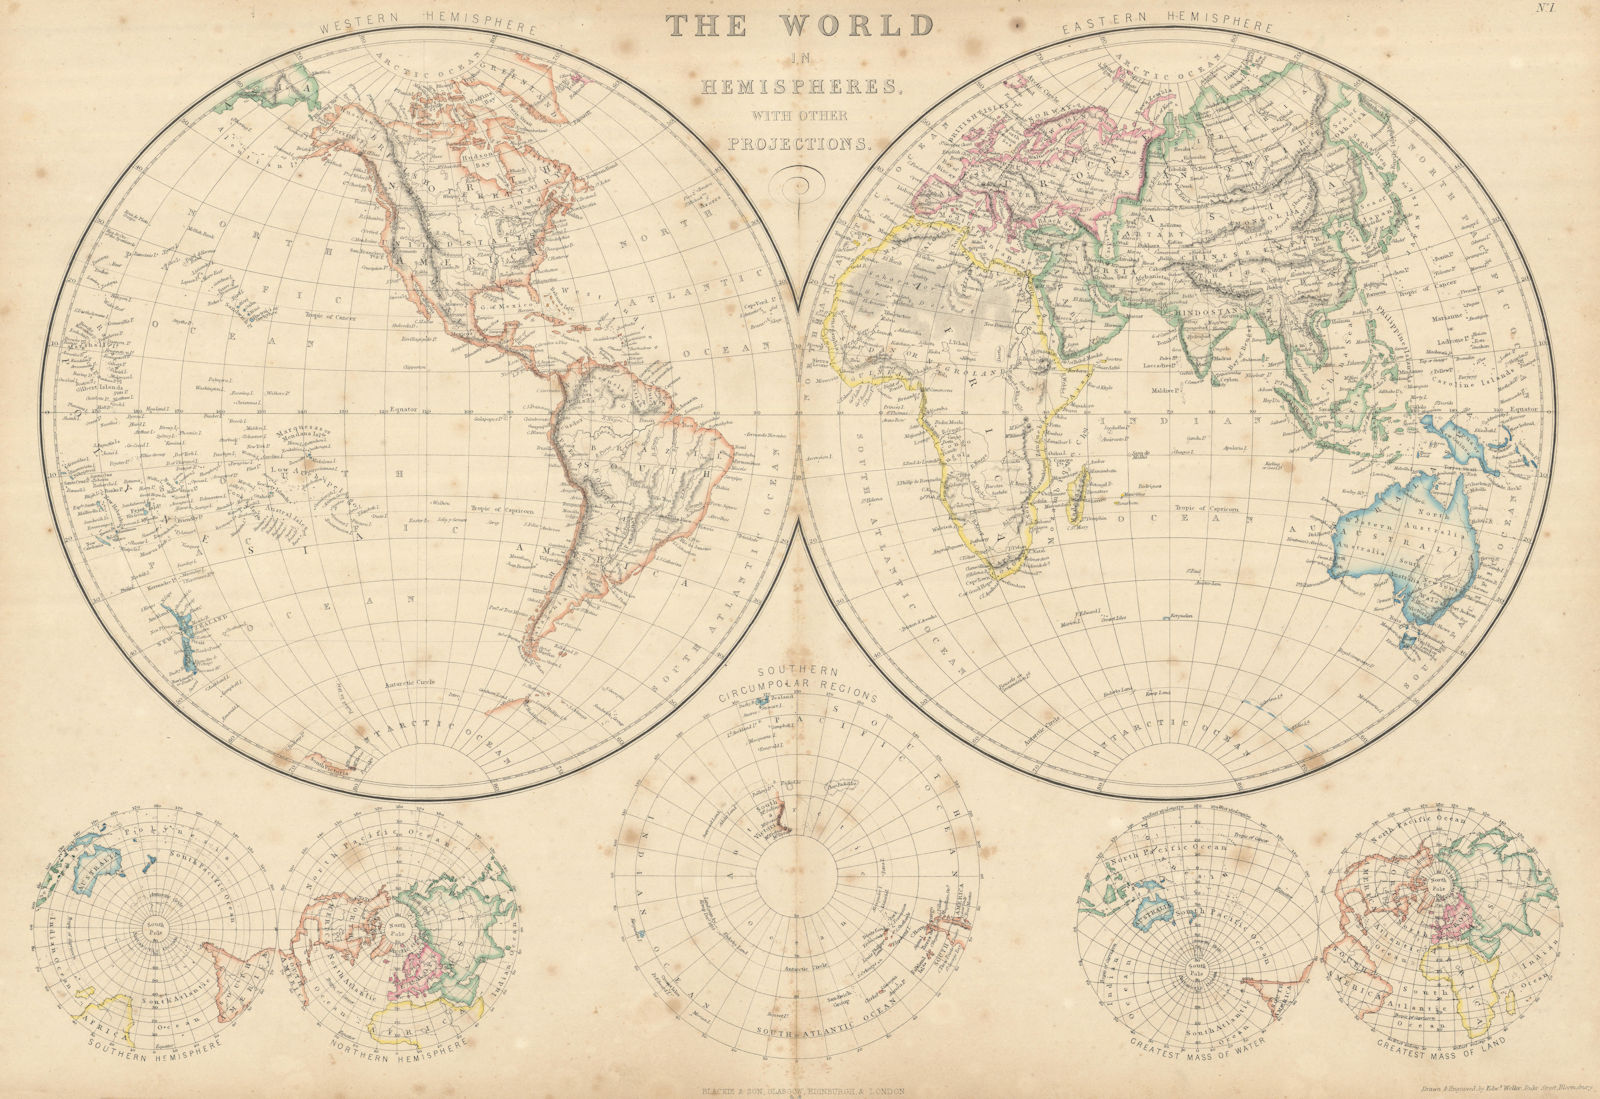 Associate Product The World in Hemispheres with Other Projections by Edward Weller 1860 old map